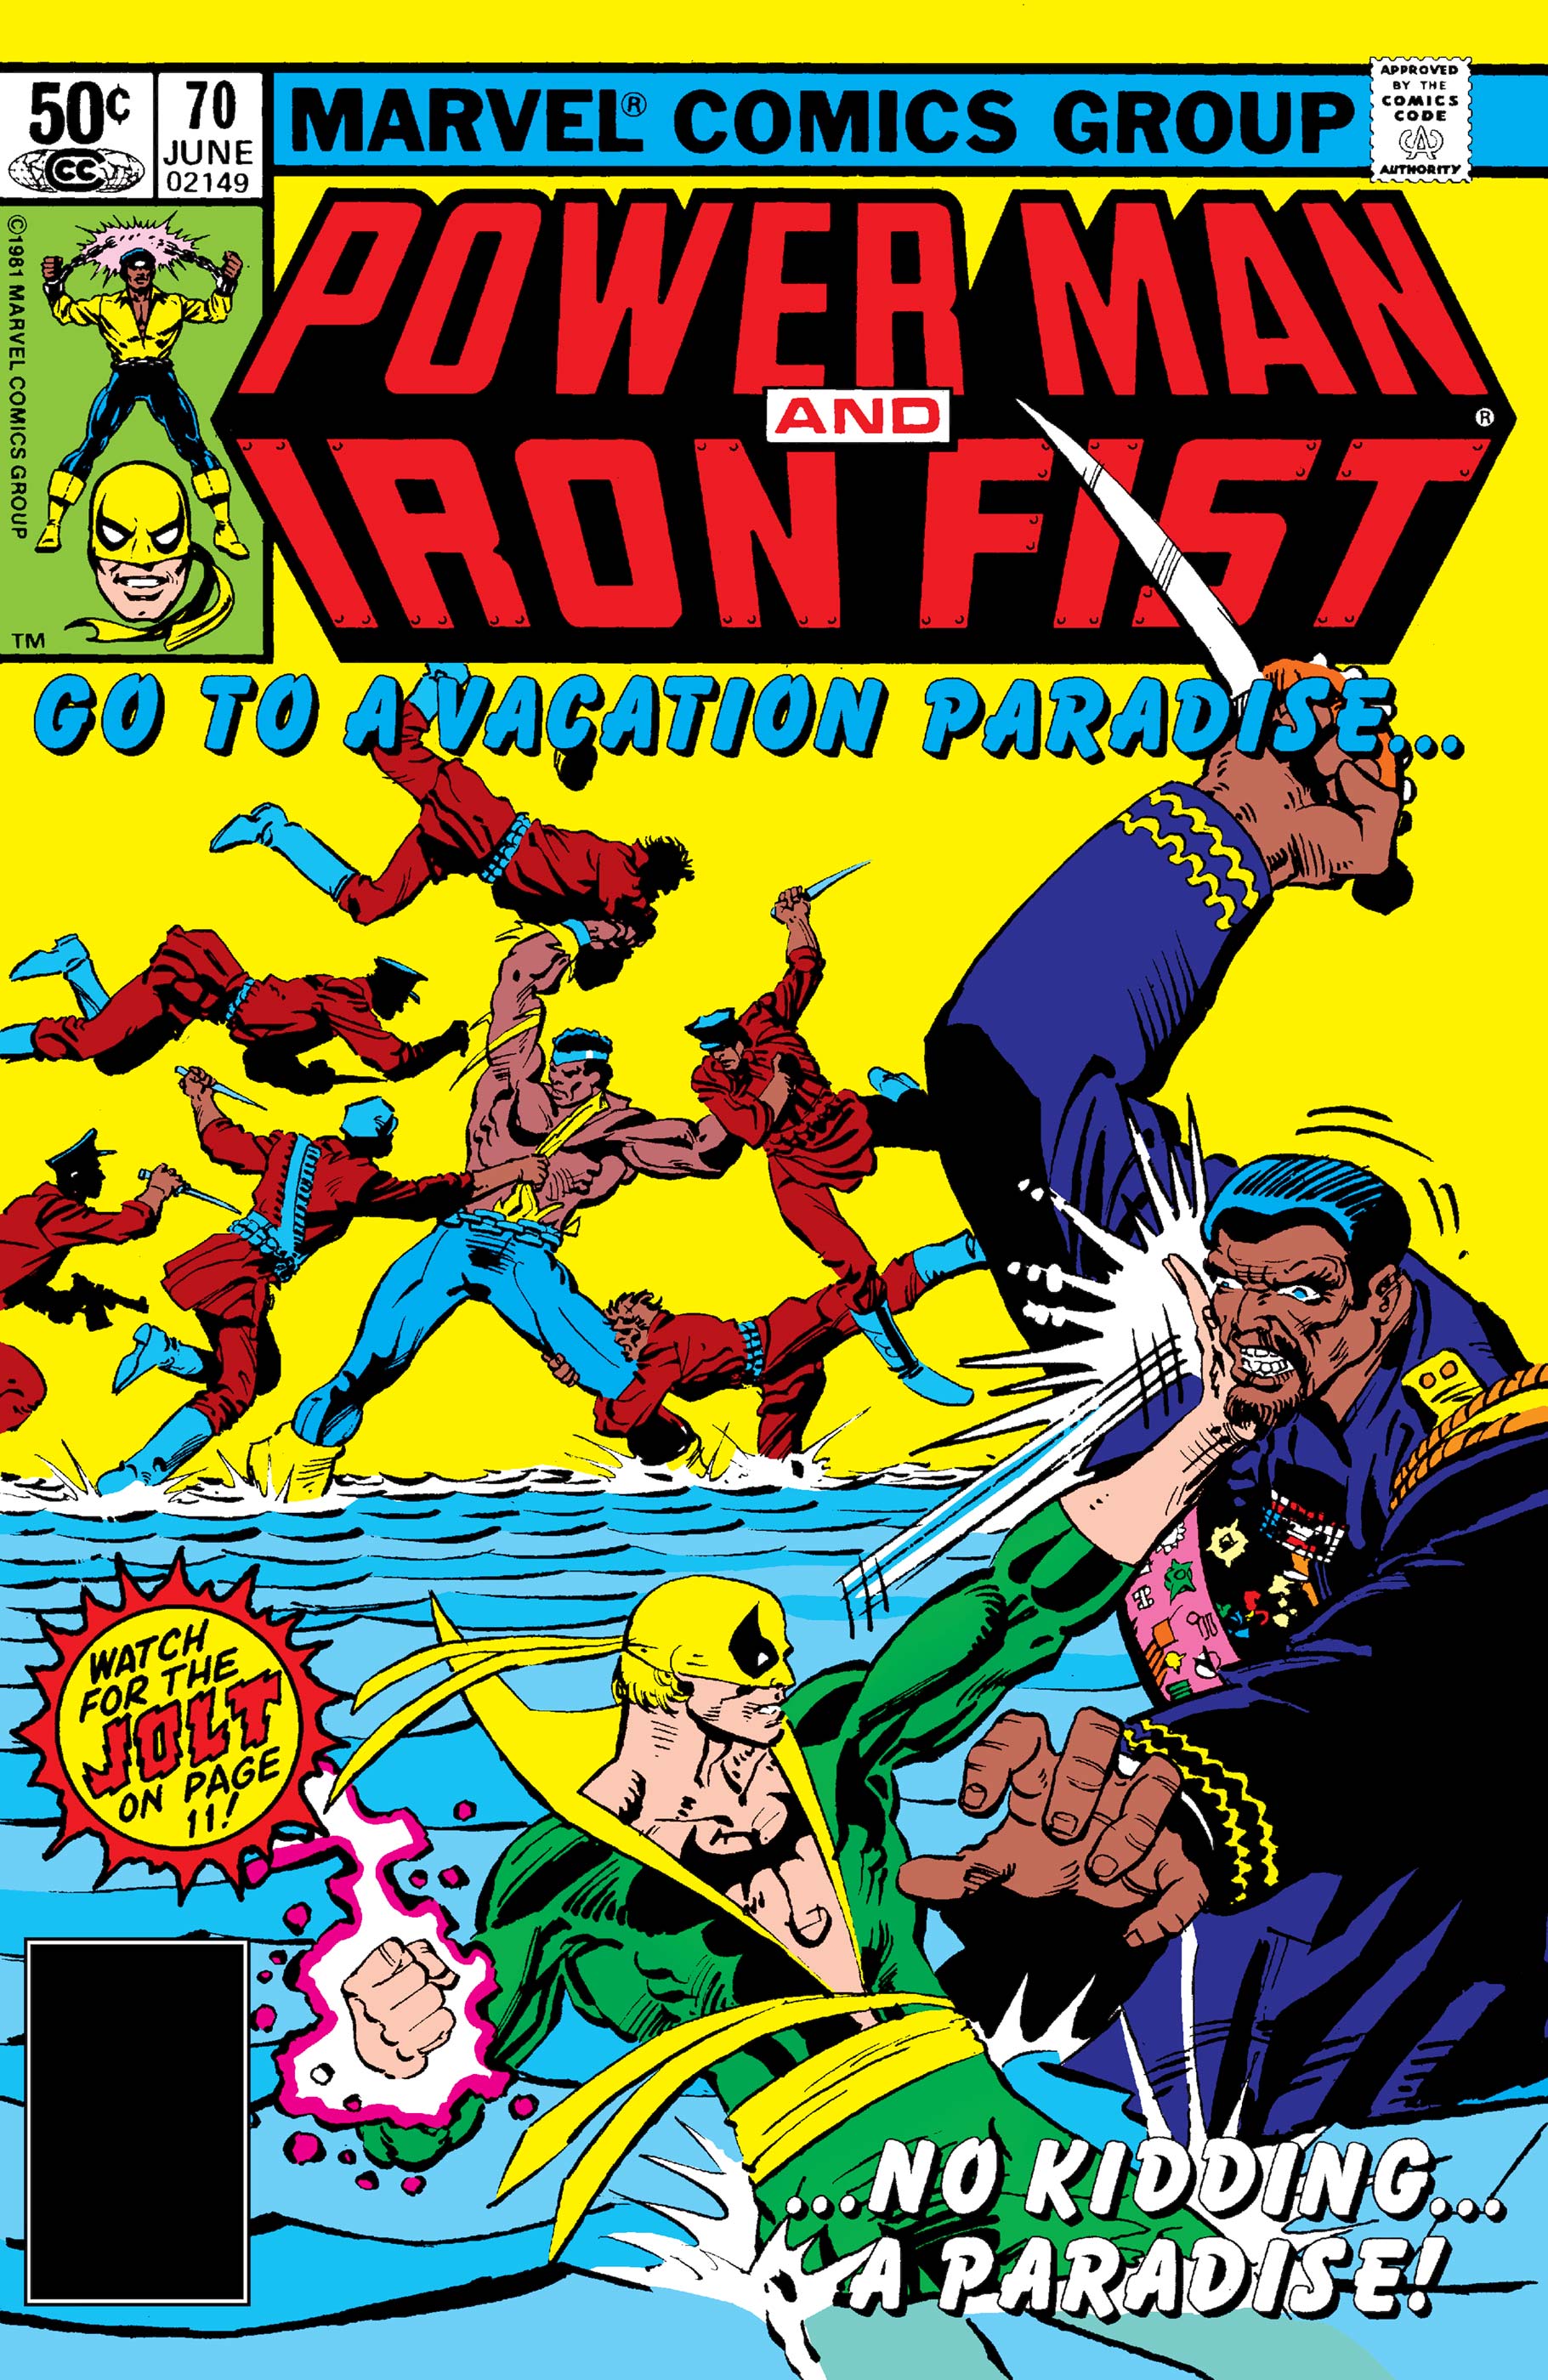 Power Man and Iron Fist (1978) #101, Comic Issues